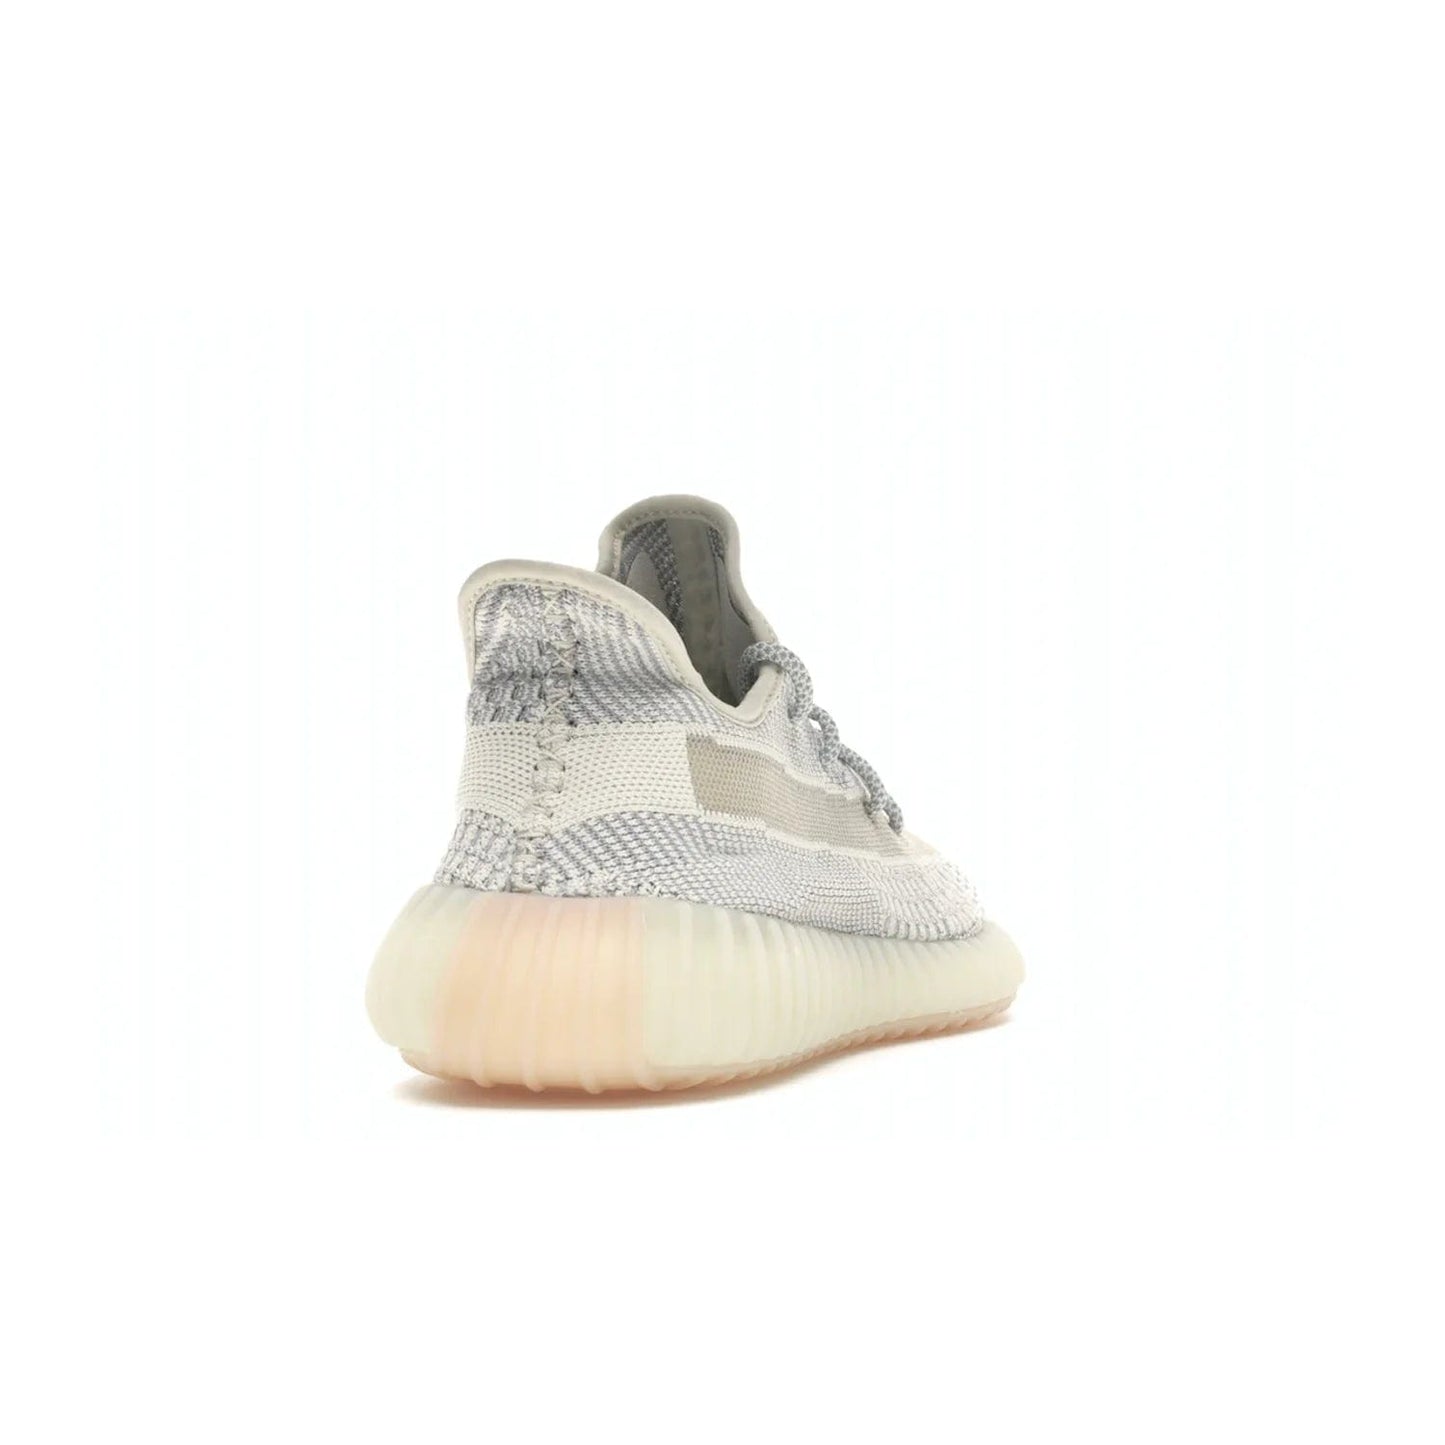 adidas Yeezy Boost 350 V2 Lundmark (Non Reflective) - Image 30 - Only at www.BallersClubKickz.com - Shop the exclusive adidas Yeezy Boost 350 V2 Lundmark with a subtle summer color, mesh upper, white-to-cream transitional midsole, light tan outsole, and pink middle stripe. Comfort and style come together in this perfect summer 350 V2. Released on July 11, 2019.